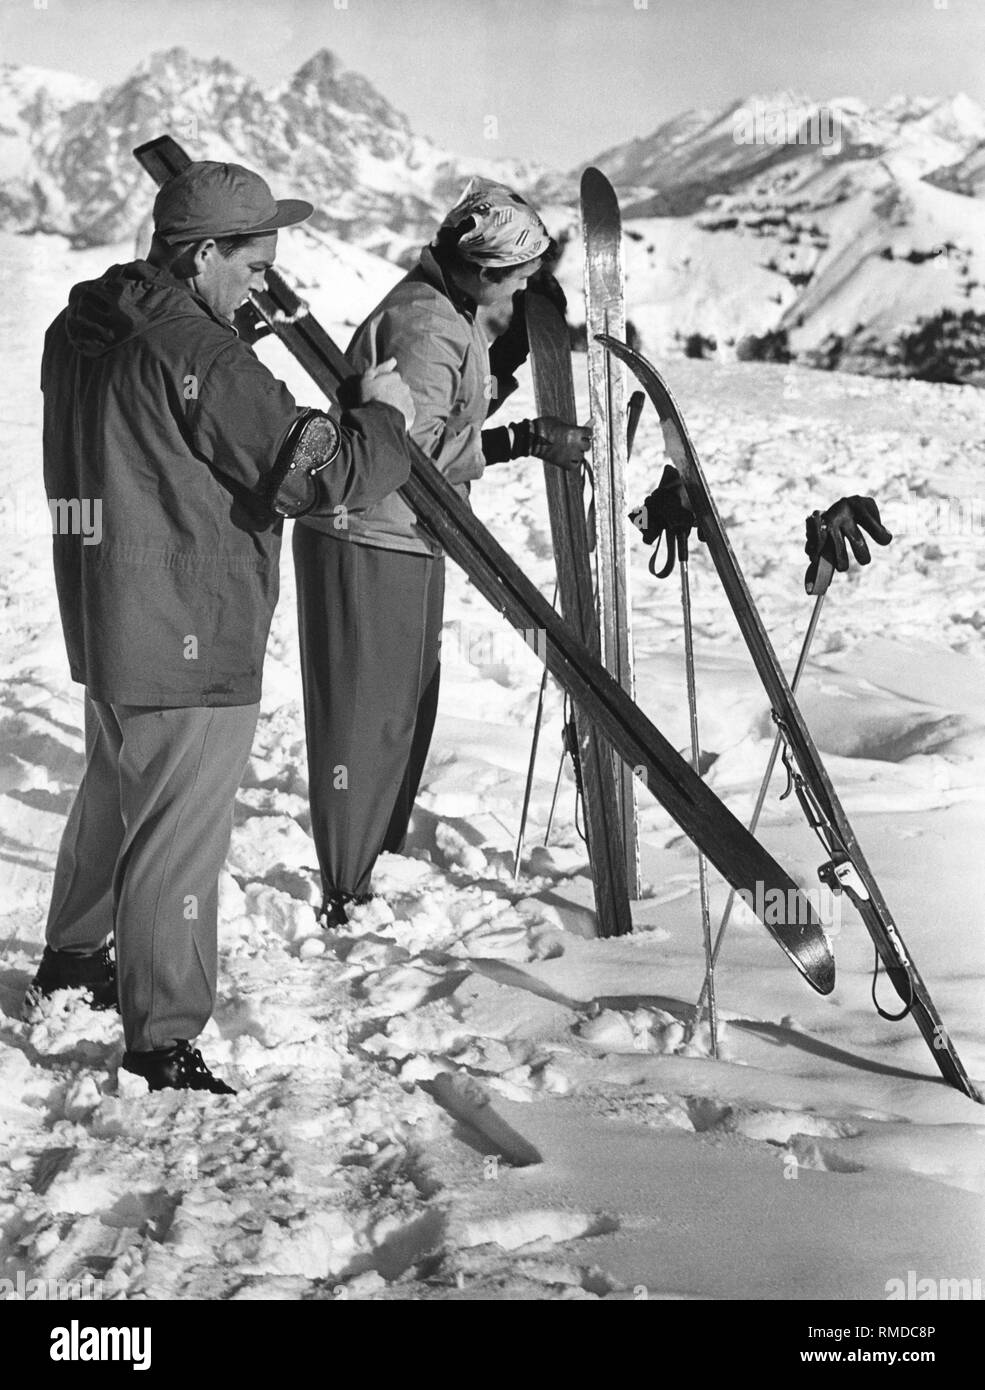 Waxing the skis, 50s Stock Photo